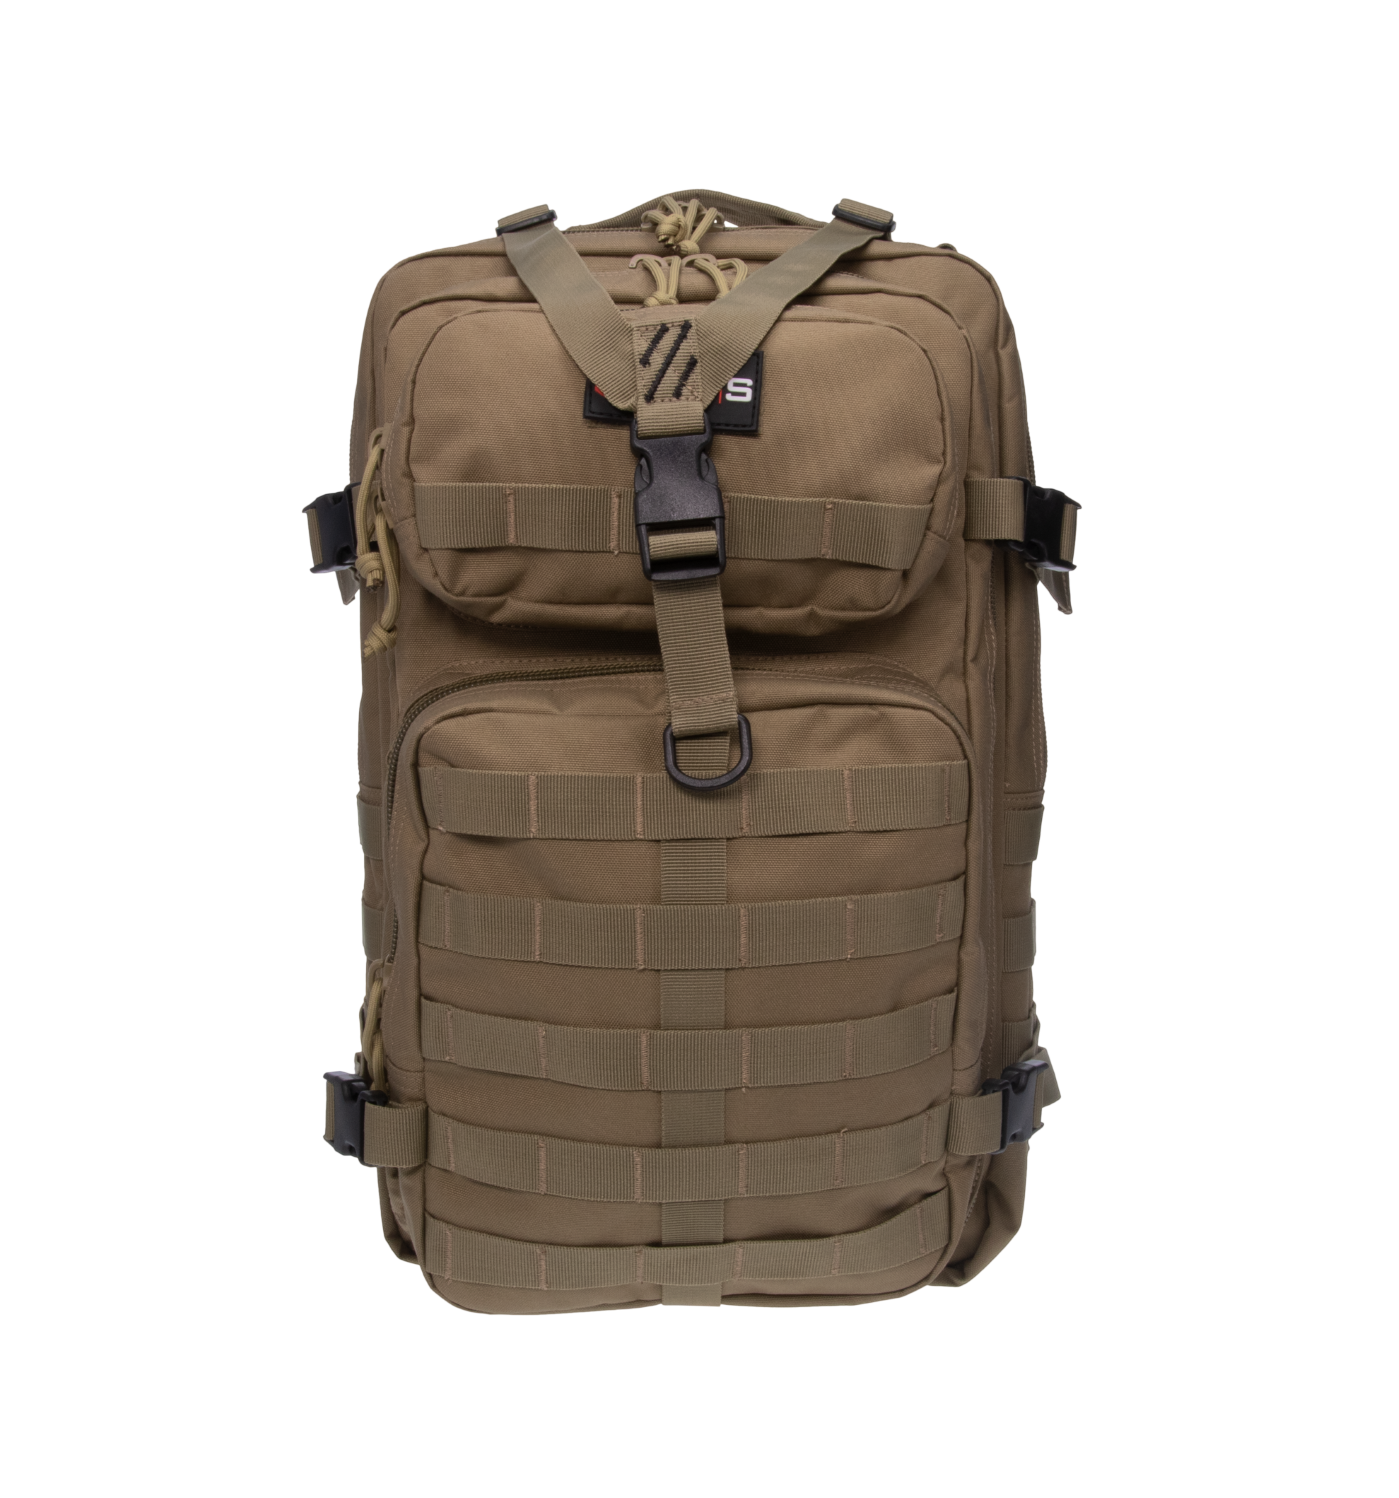 Tactical Range Backpack Tall Tan 12x10x6 Unisex Adult for sale online 